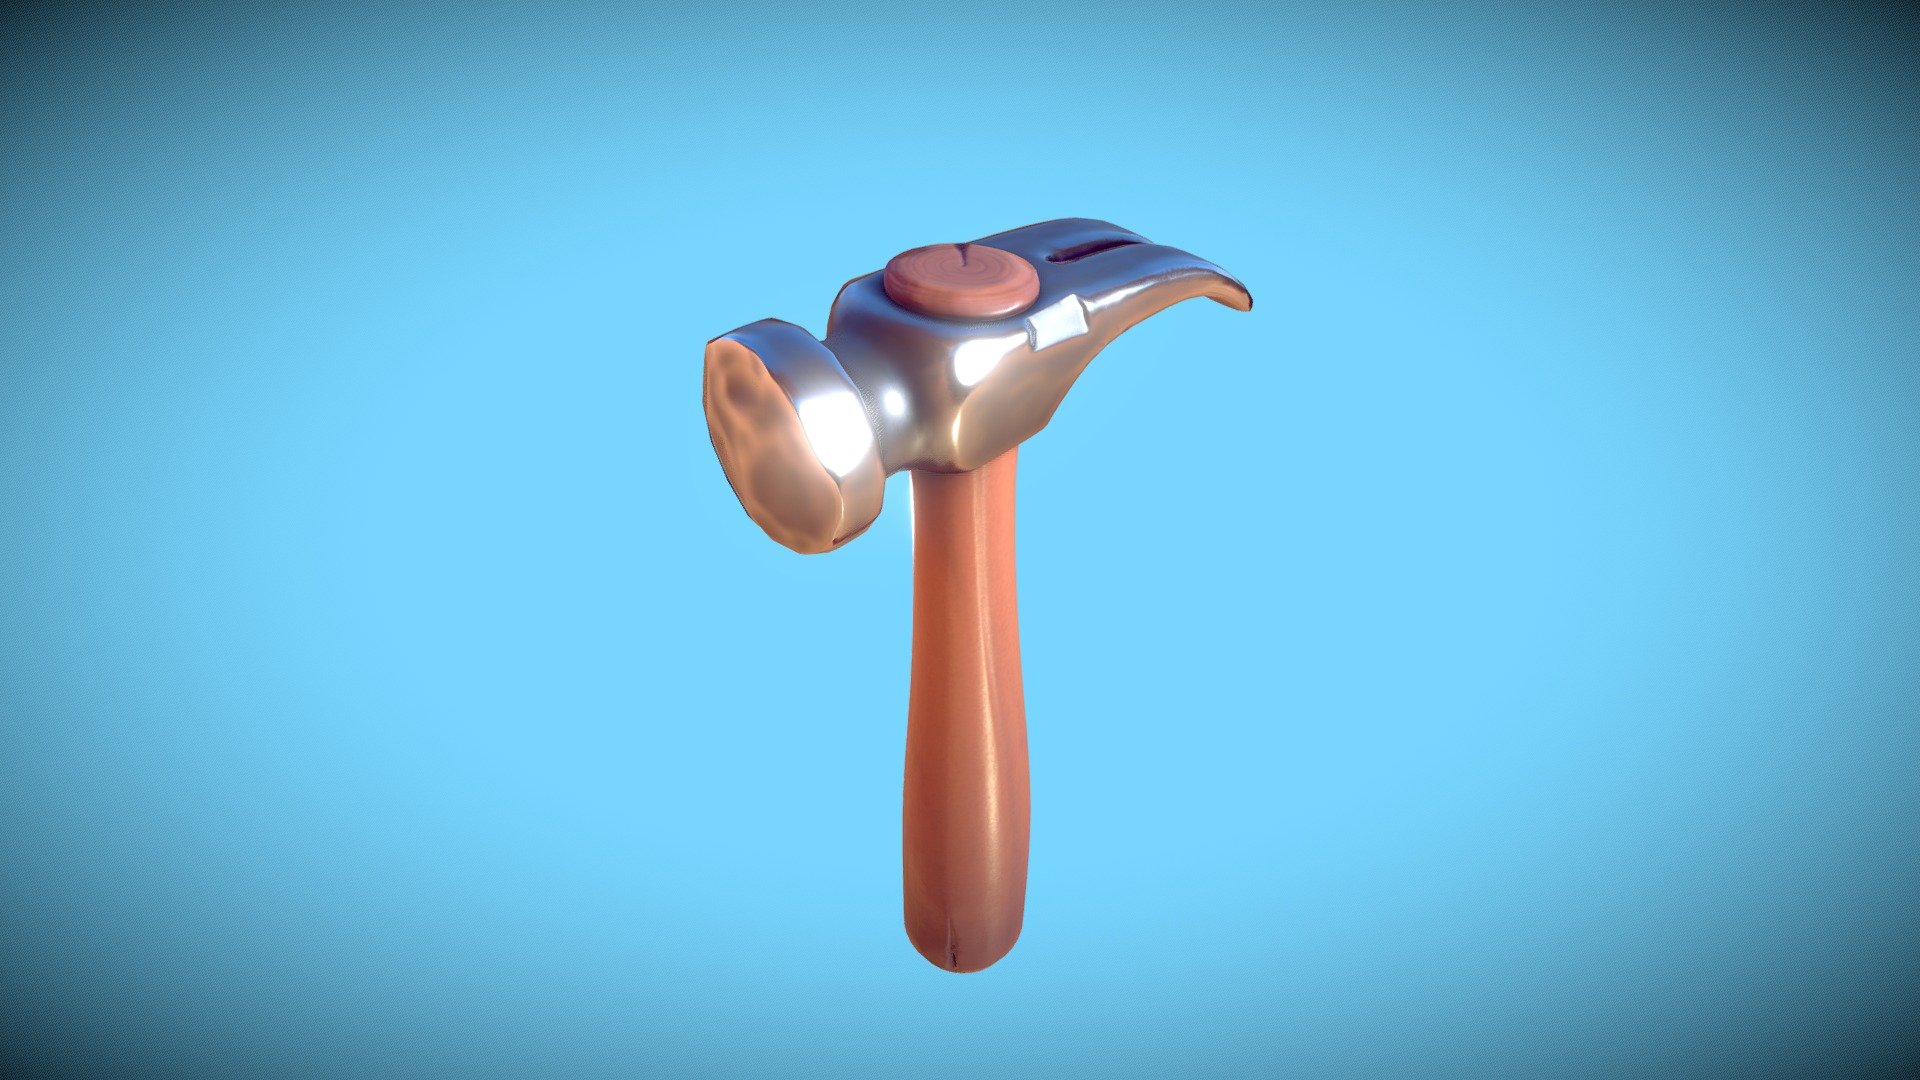 For this project, I wanted to see if I could fully model (with some sculpting) and texture a simple stylized prop in a short time period. Most of the work was done in one evening, with a few fixes and final touches happening over a couple other nights.
This hammer was modeled in Blender, sculpted in Zbrush, and textured in Substance Painter.

View the project on ArtStation here:
https://www.artstation.com/artwork/wJ365X - Stylized Hammer - 3D model by David Belnap (@davidbelnap) 3d model